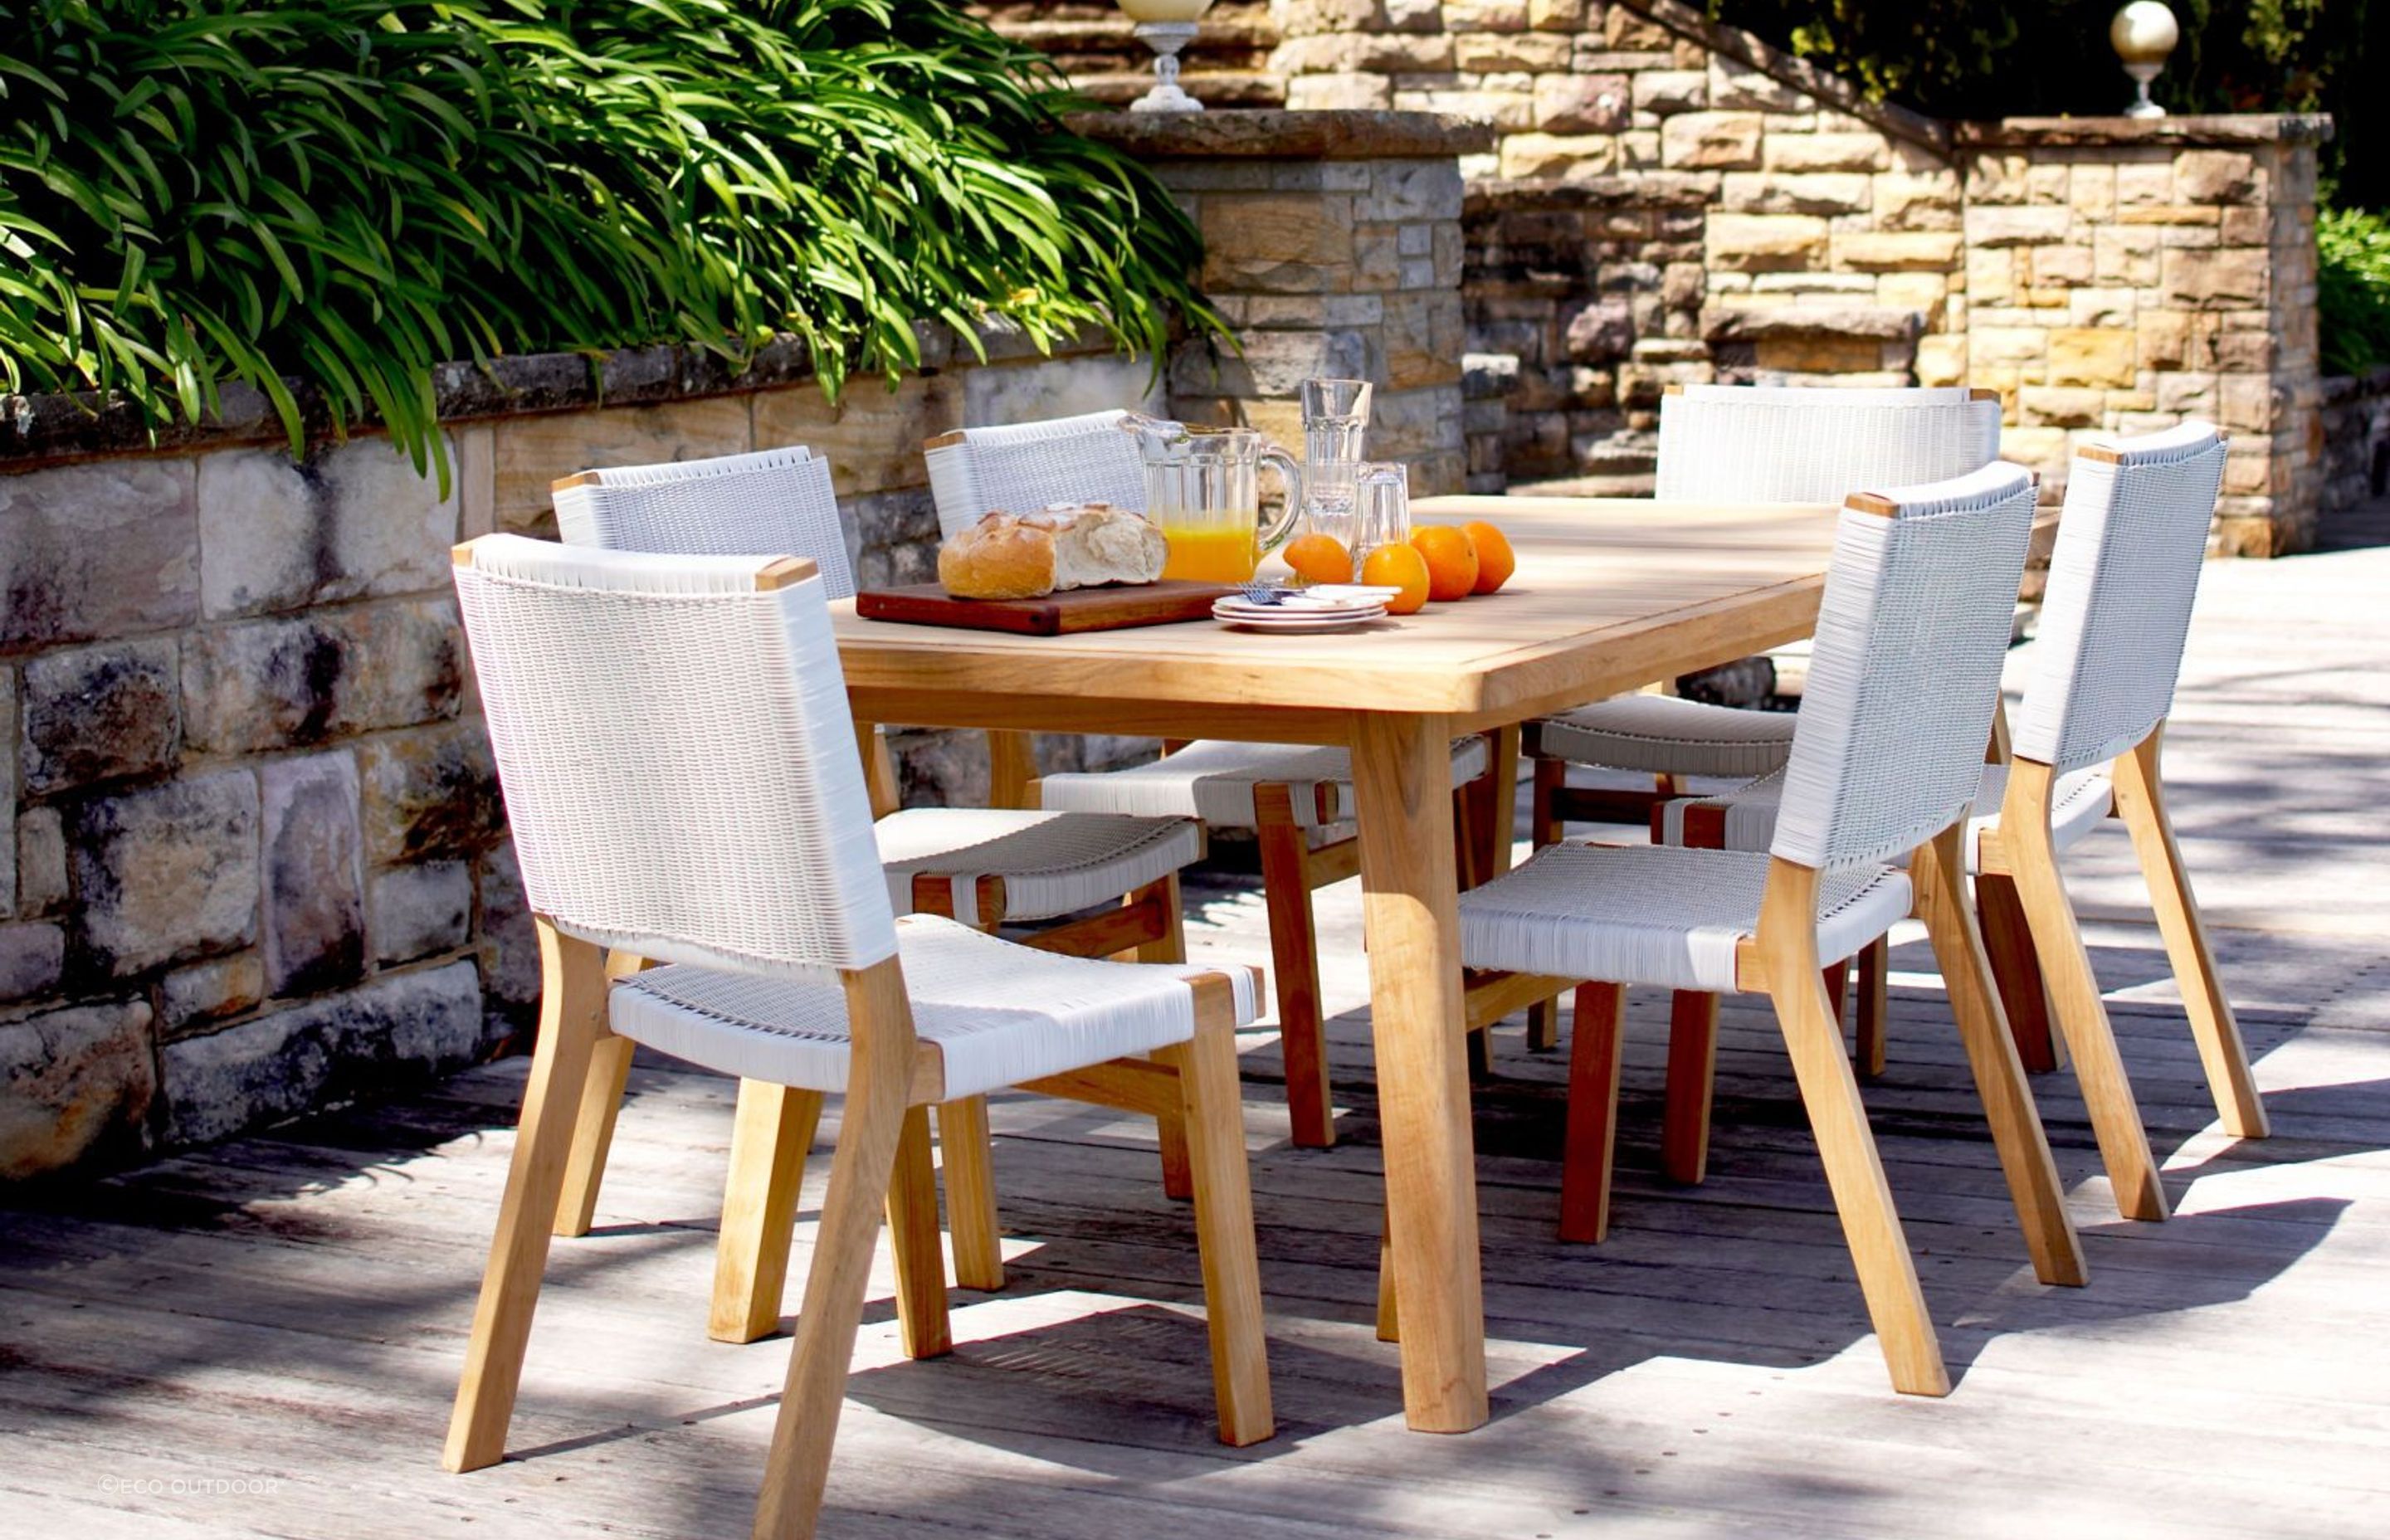 Teak frames and a Rehau wicker weave means Barwon Outdoor Dining Chairs can be left outside in the full Australian climate all day, every day.